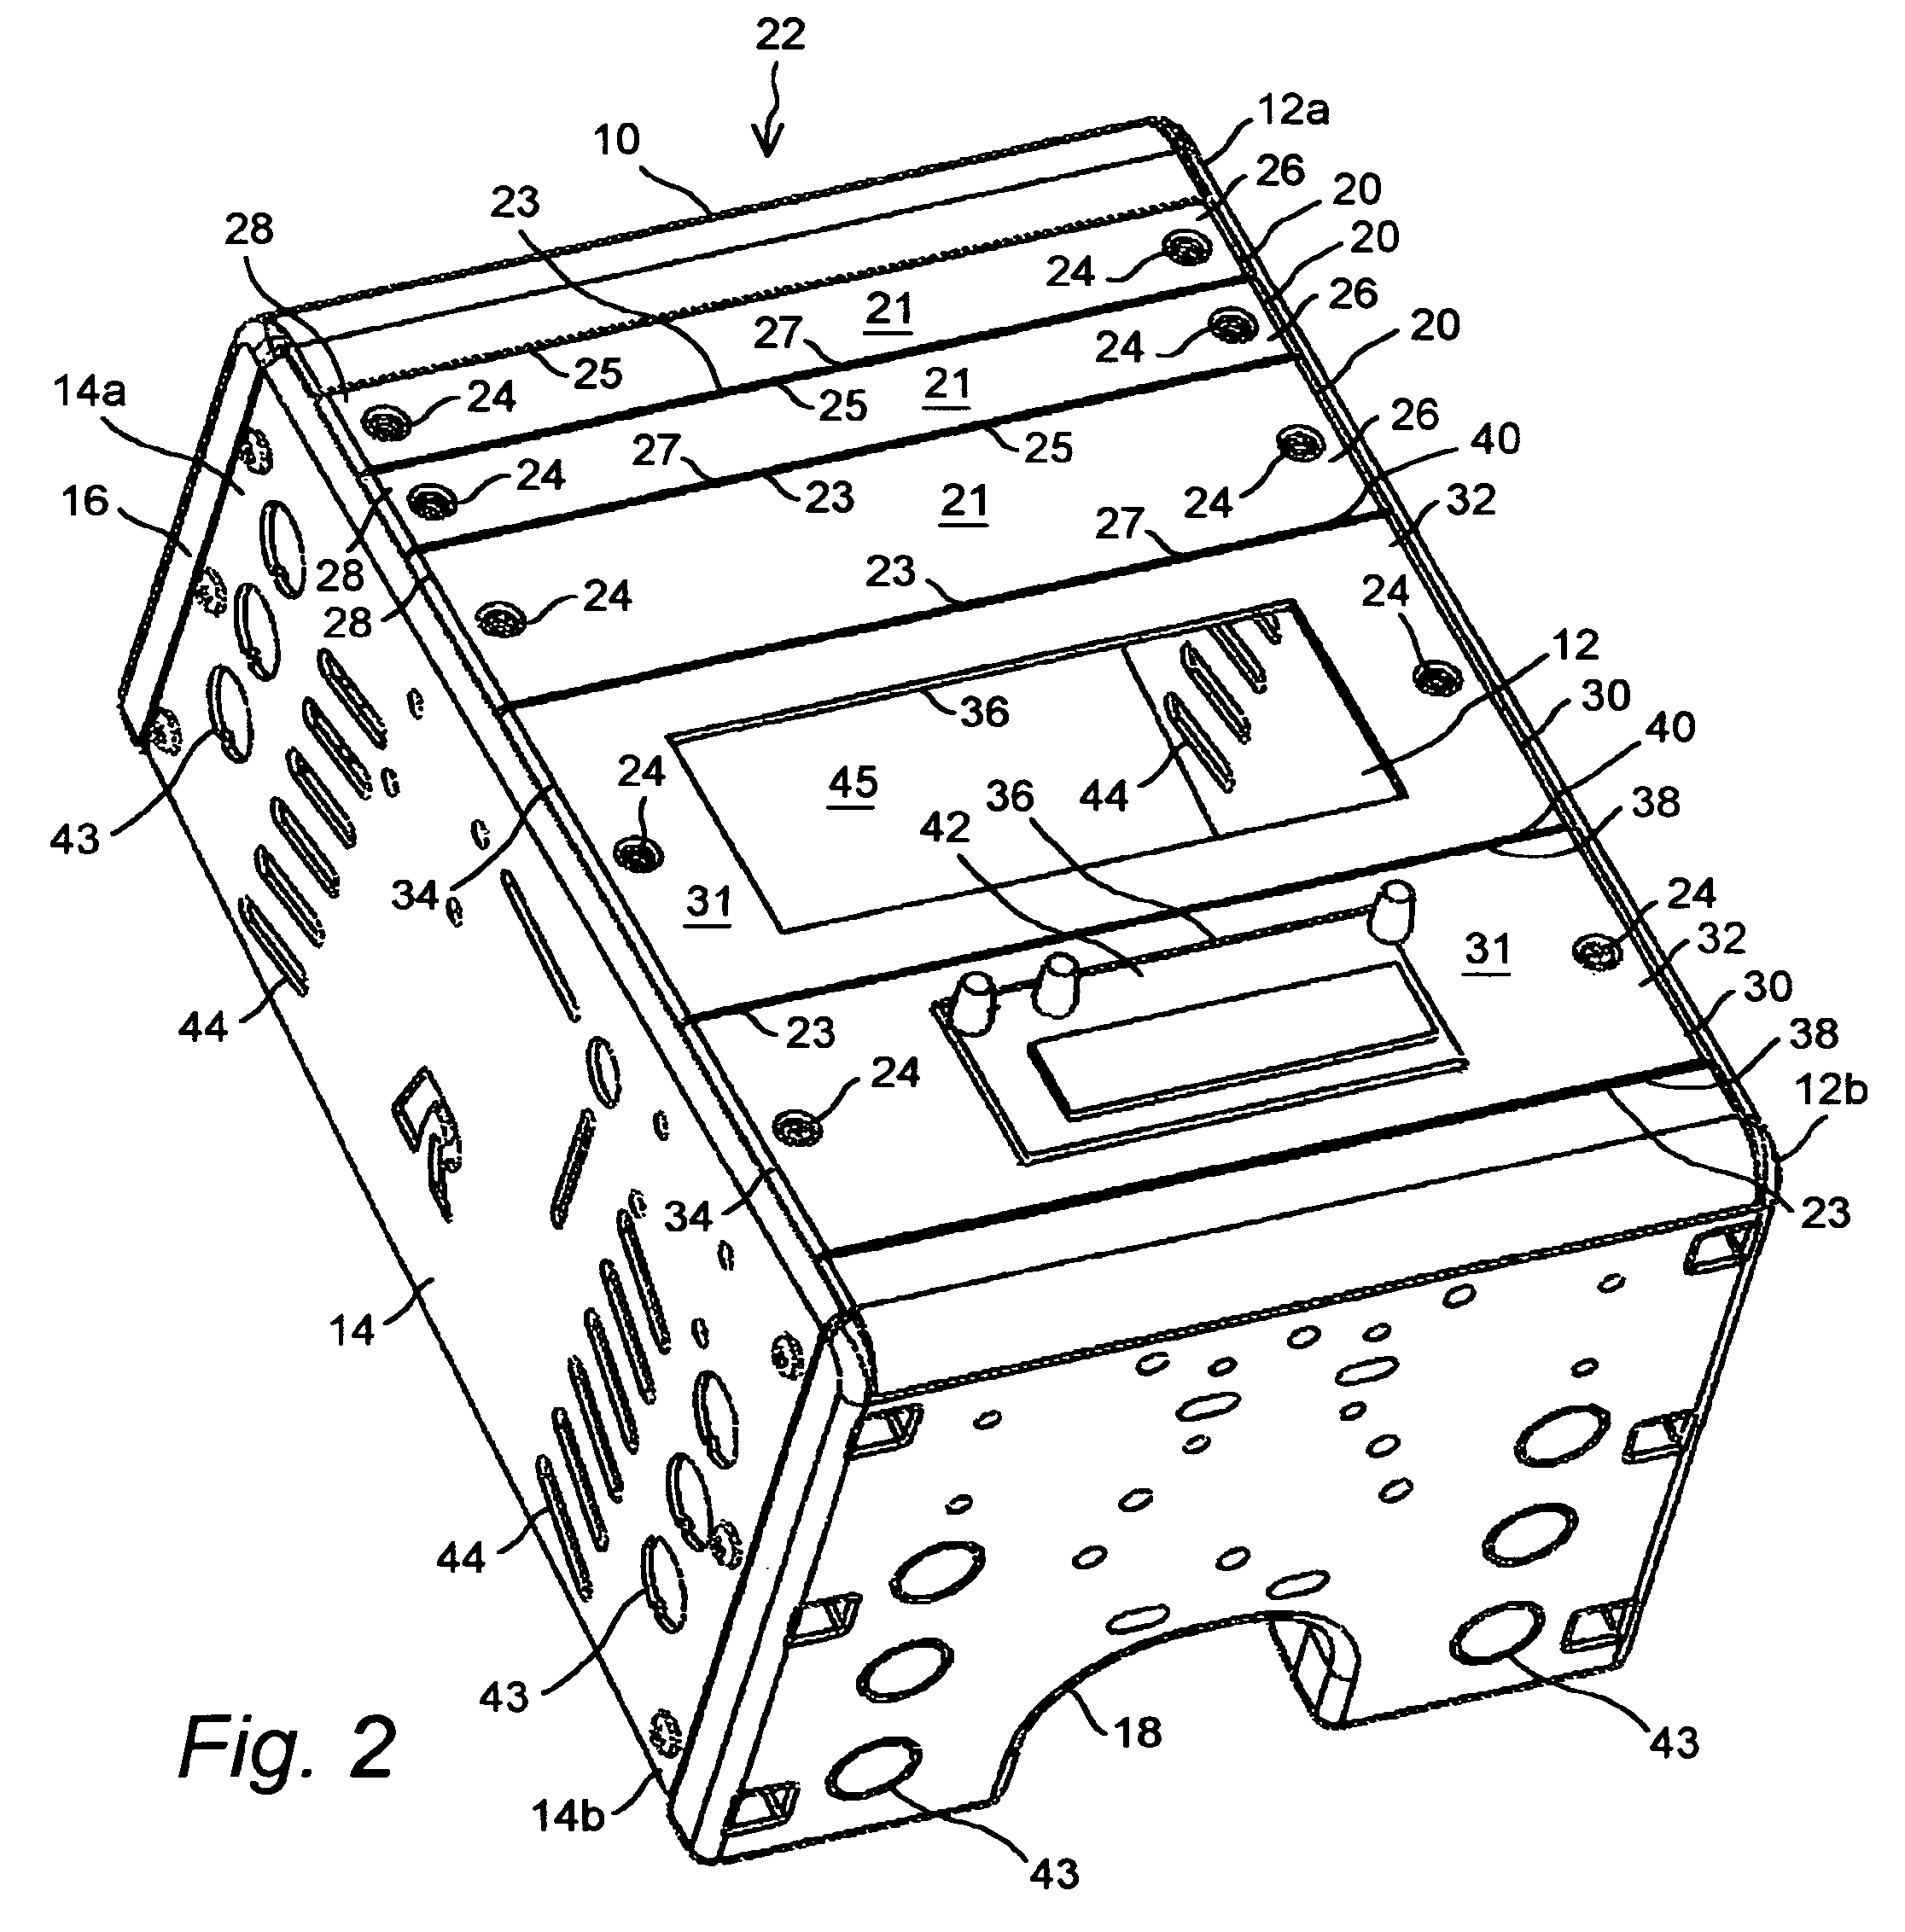 Reconfigurable console mount having a plurality of interchangeable tongue-and-groove blank and equipment mounting panels and quick disconnect clamps